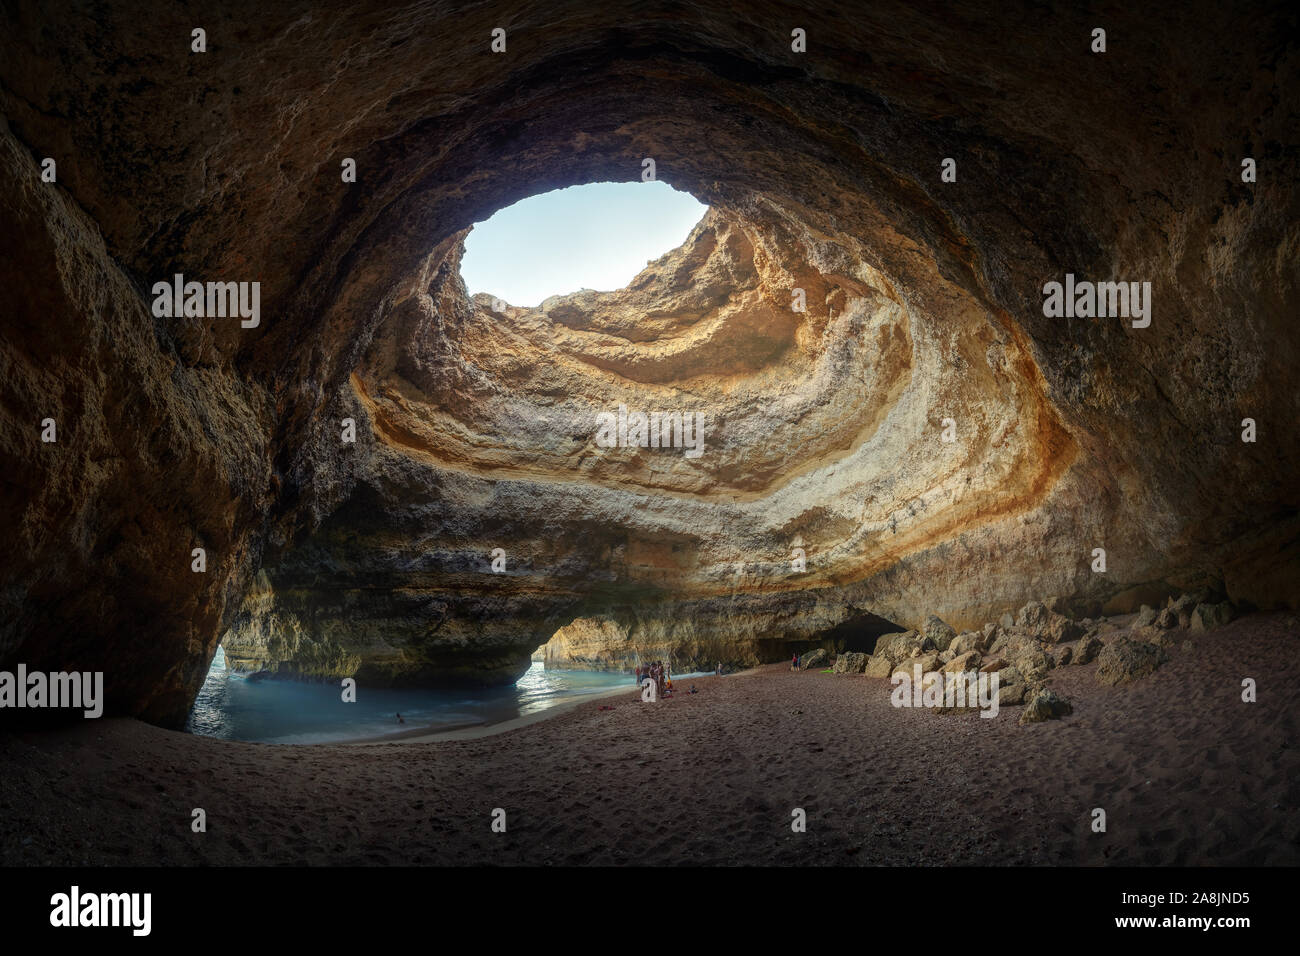 Beach inside a rock cave in Algarve, Portugal. Hole in the ceiling. Blue water and yellow stone. Rocks and sand. People inside the cave. Stock Photo